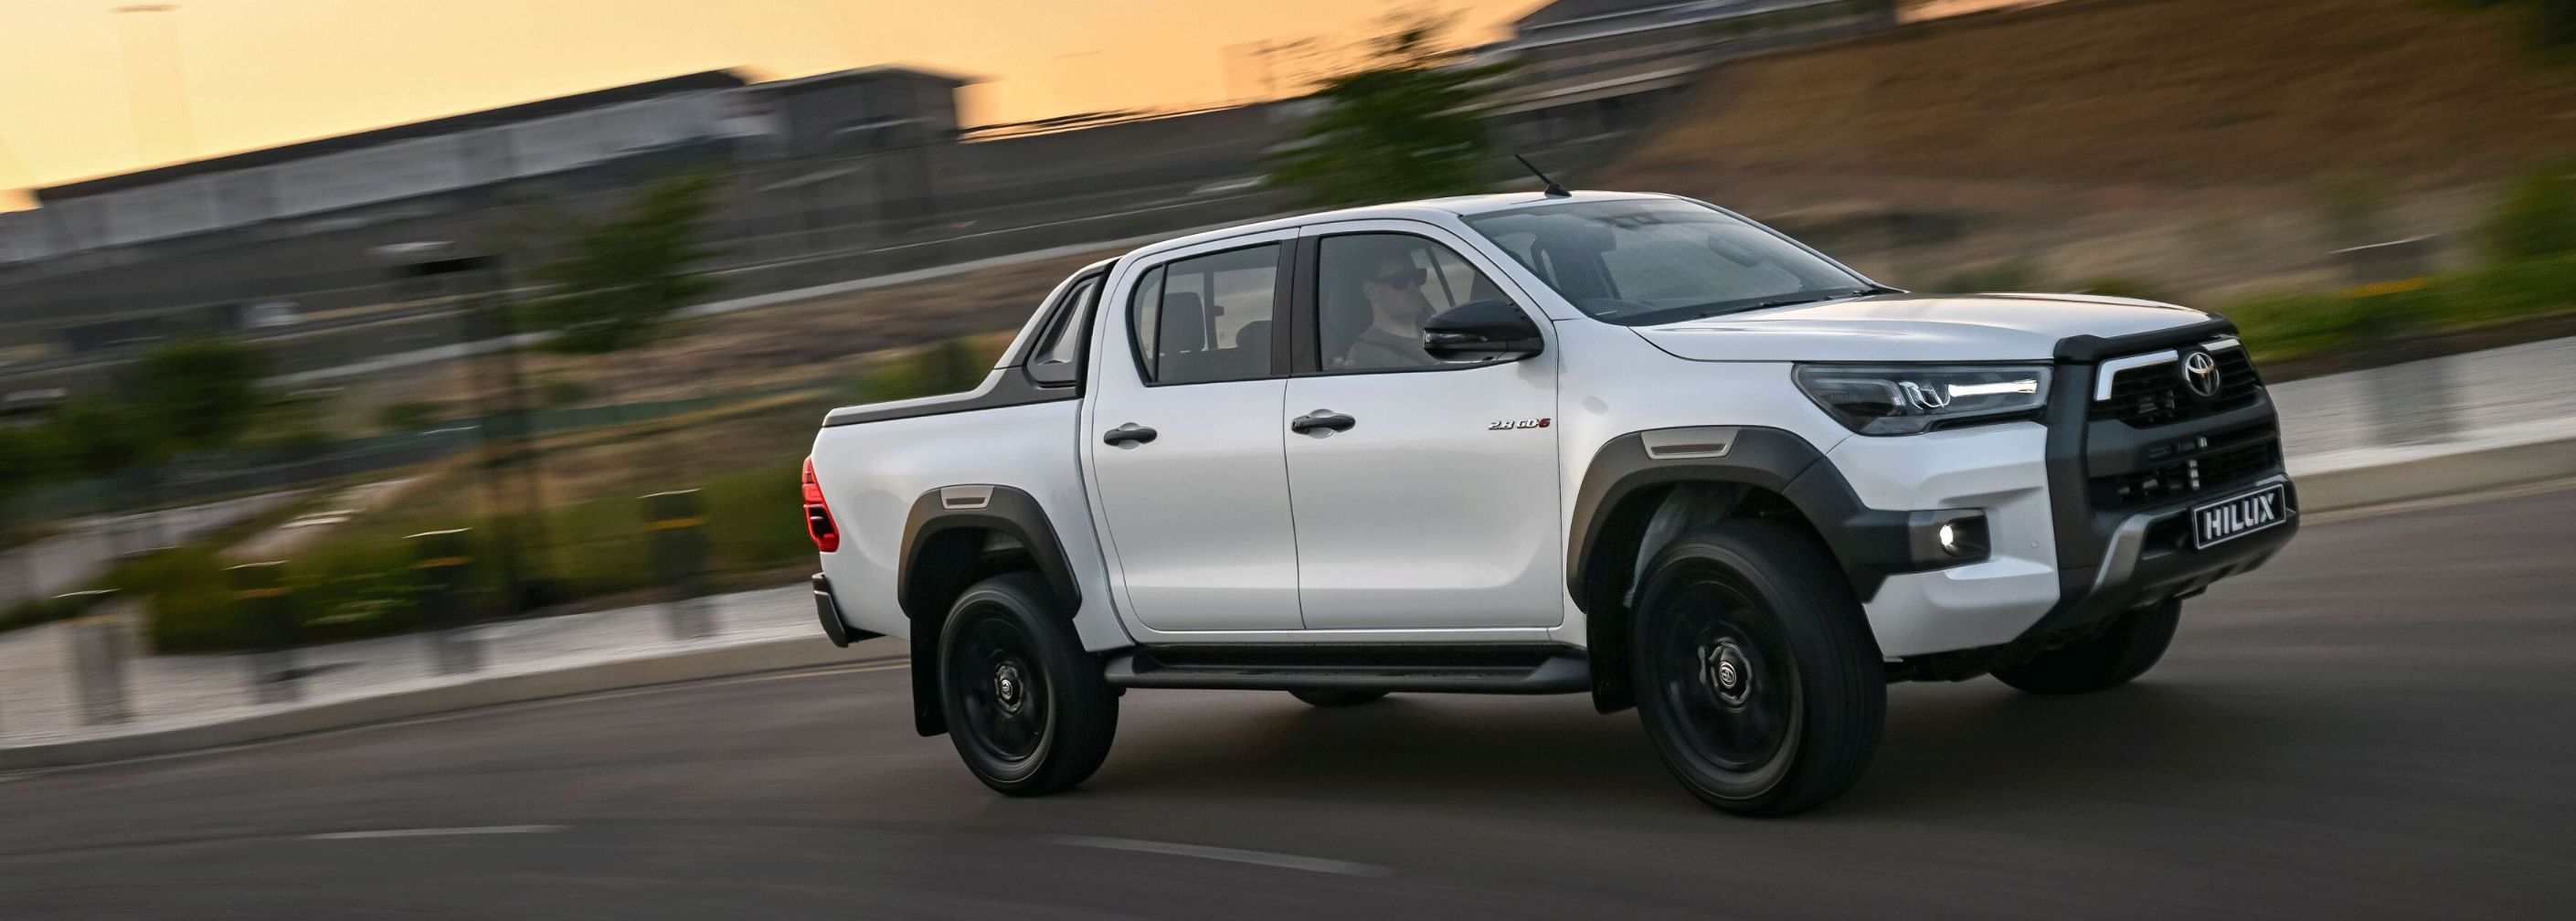 Toyota Hilux receives specification upgrades